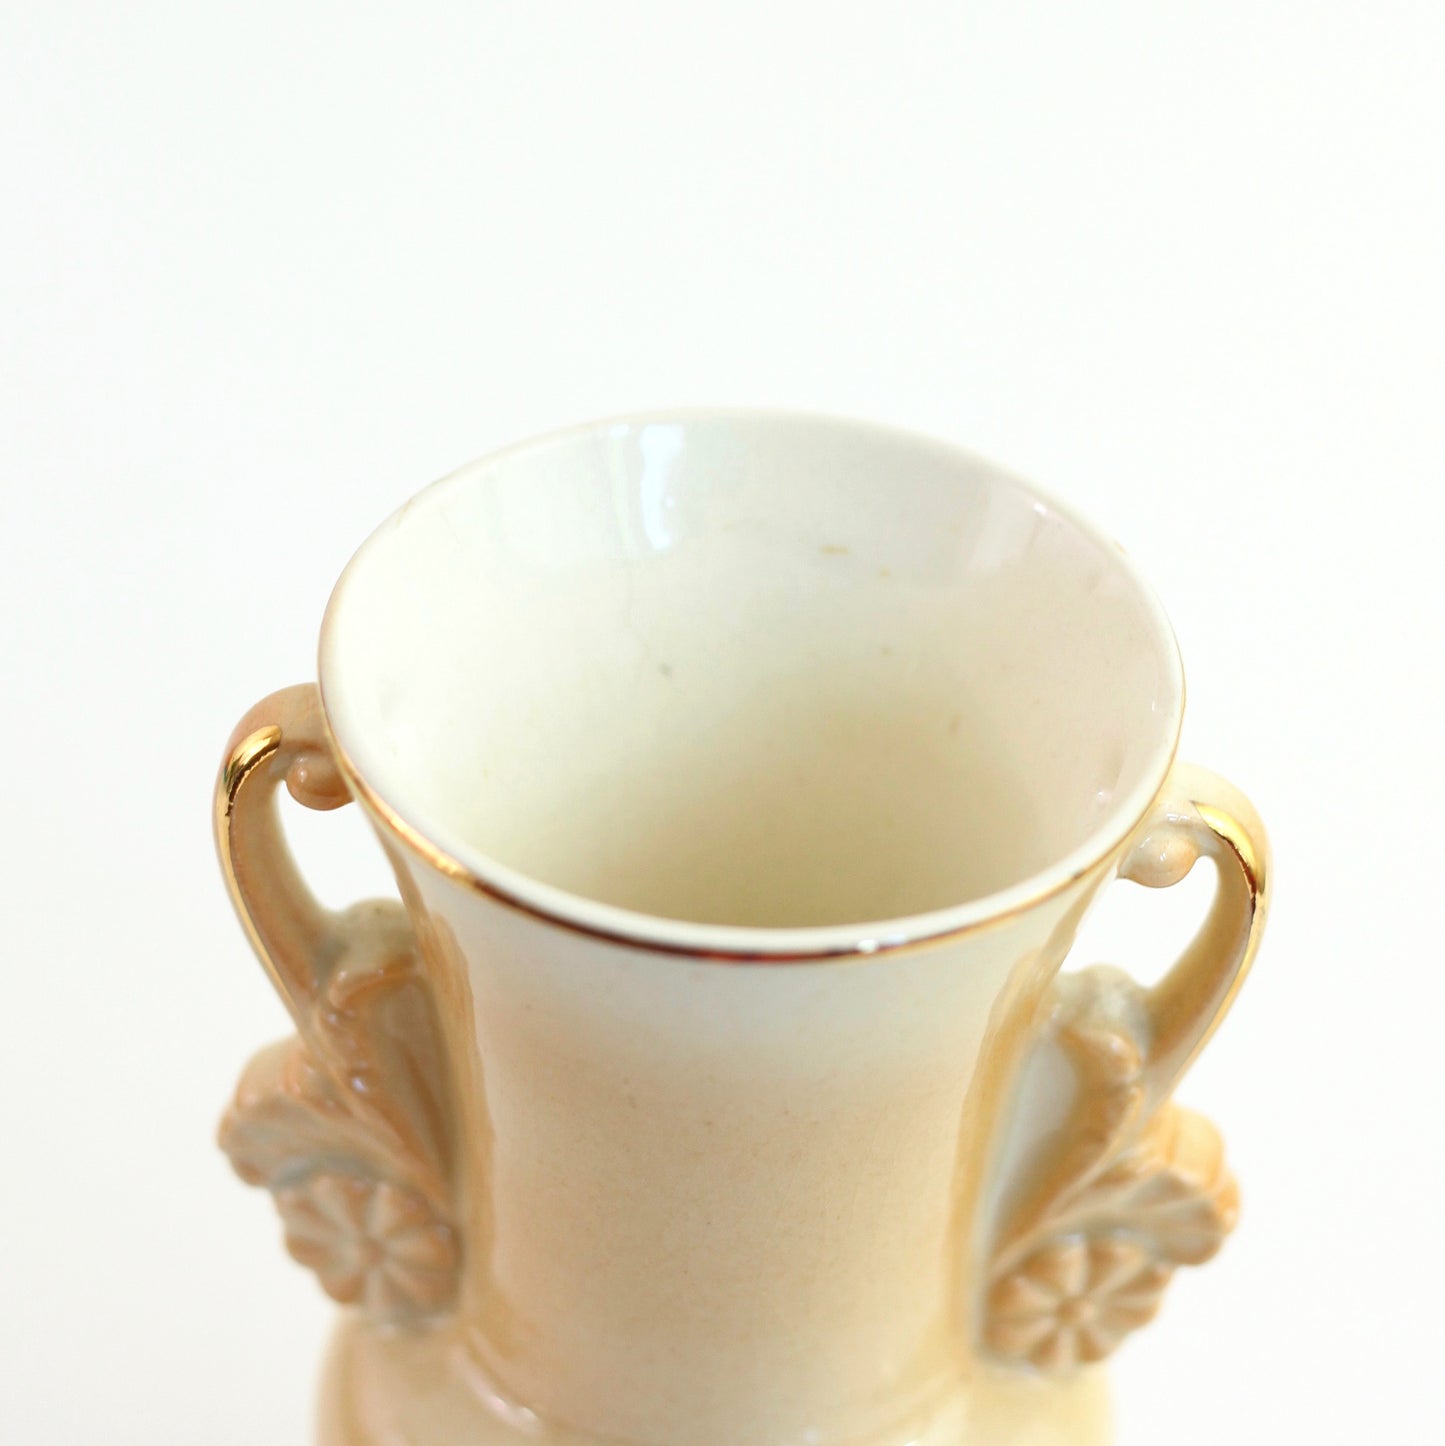 SOLD - Vintage Pastel Yellow Vase by Royal Copley